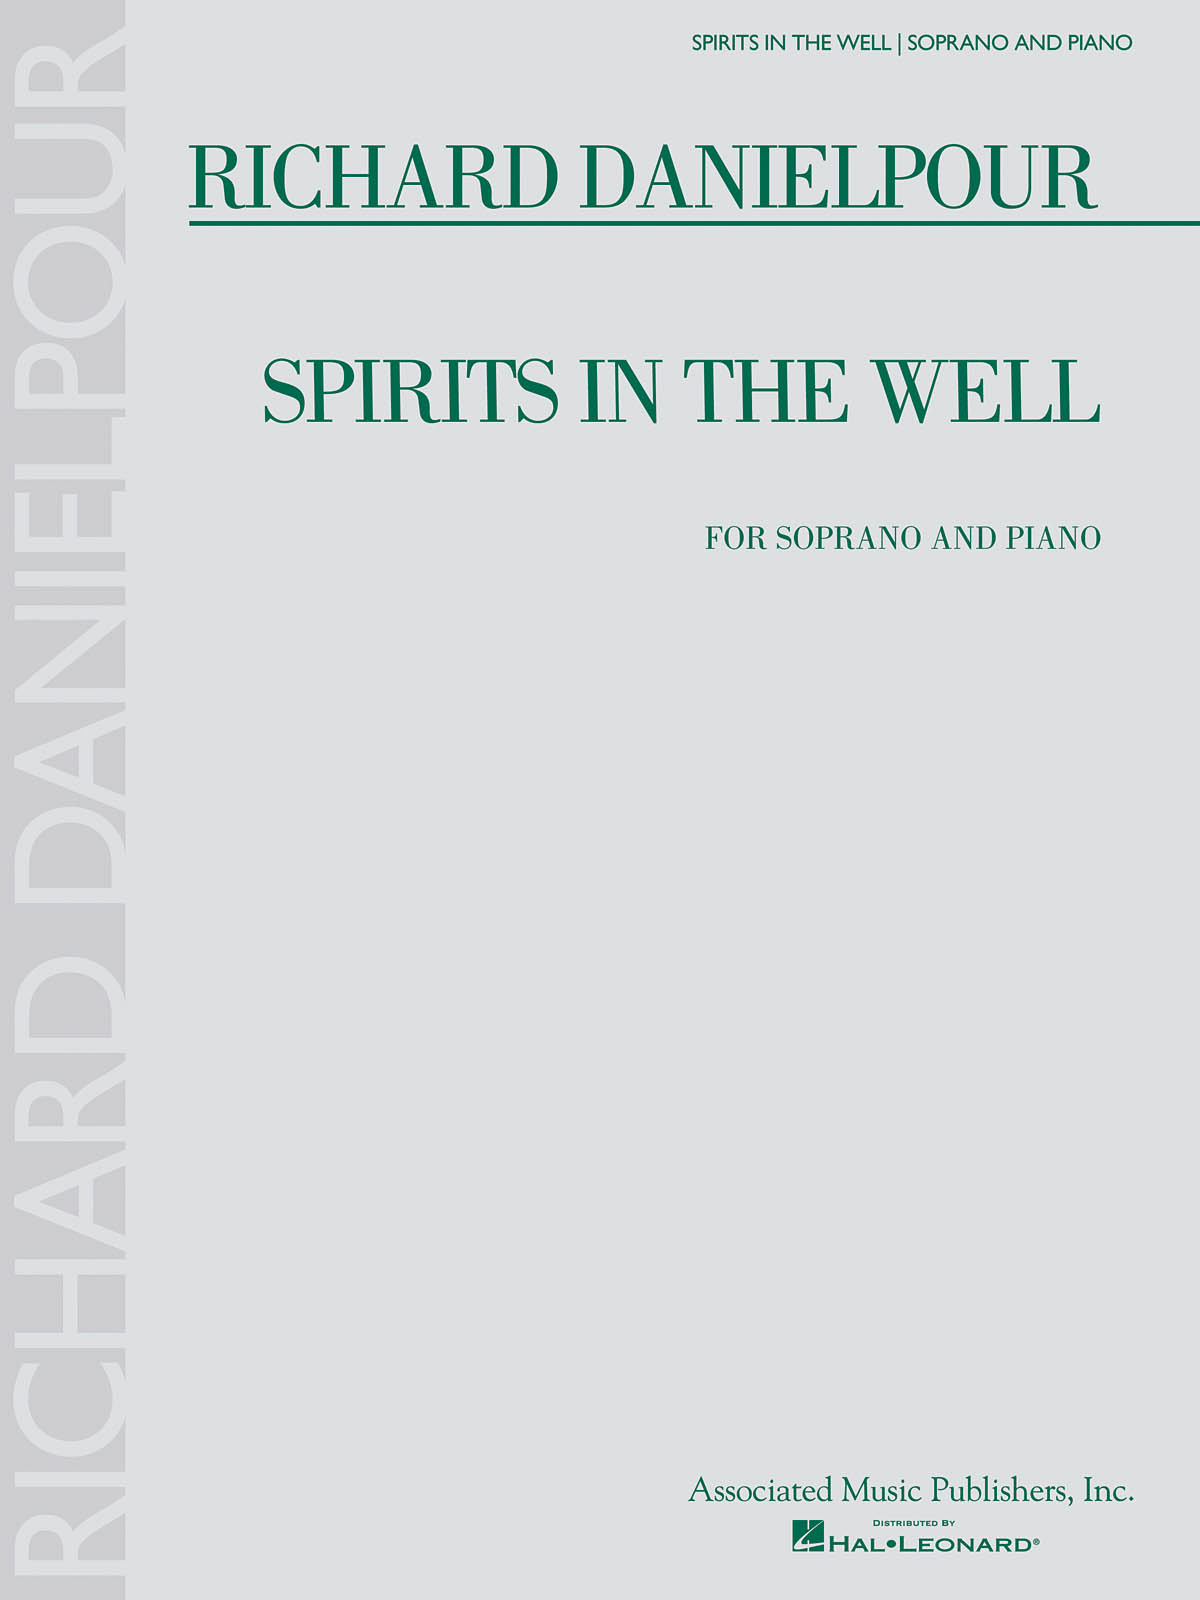 Richard Danielpour - Spirits in the Well(Soprano and Piano)